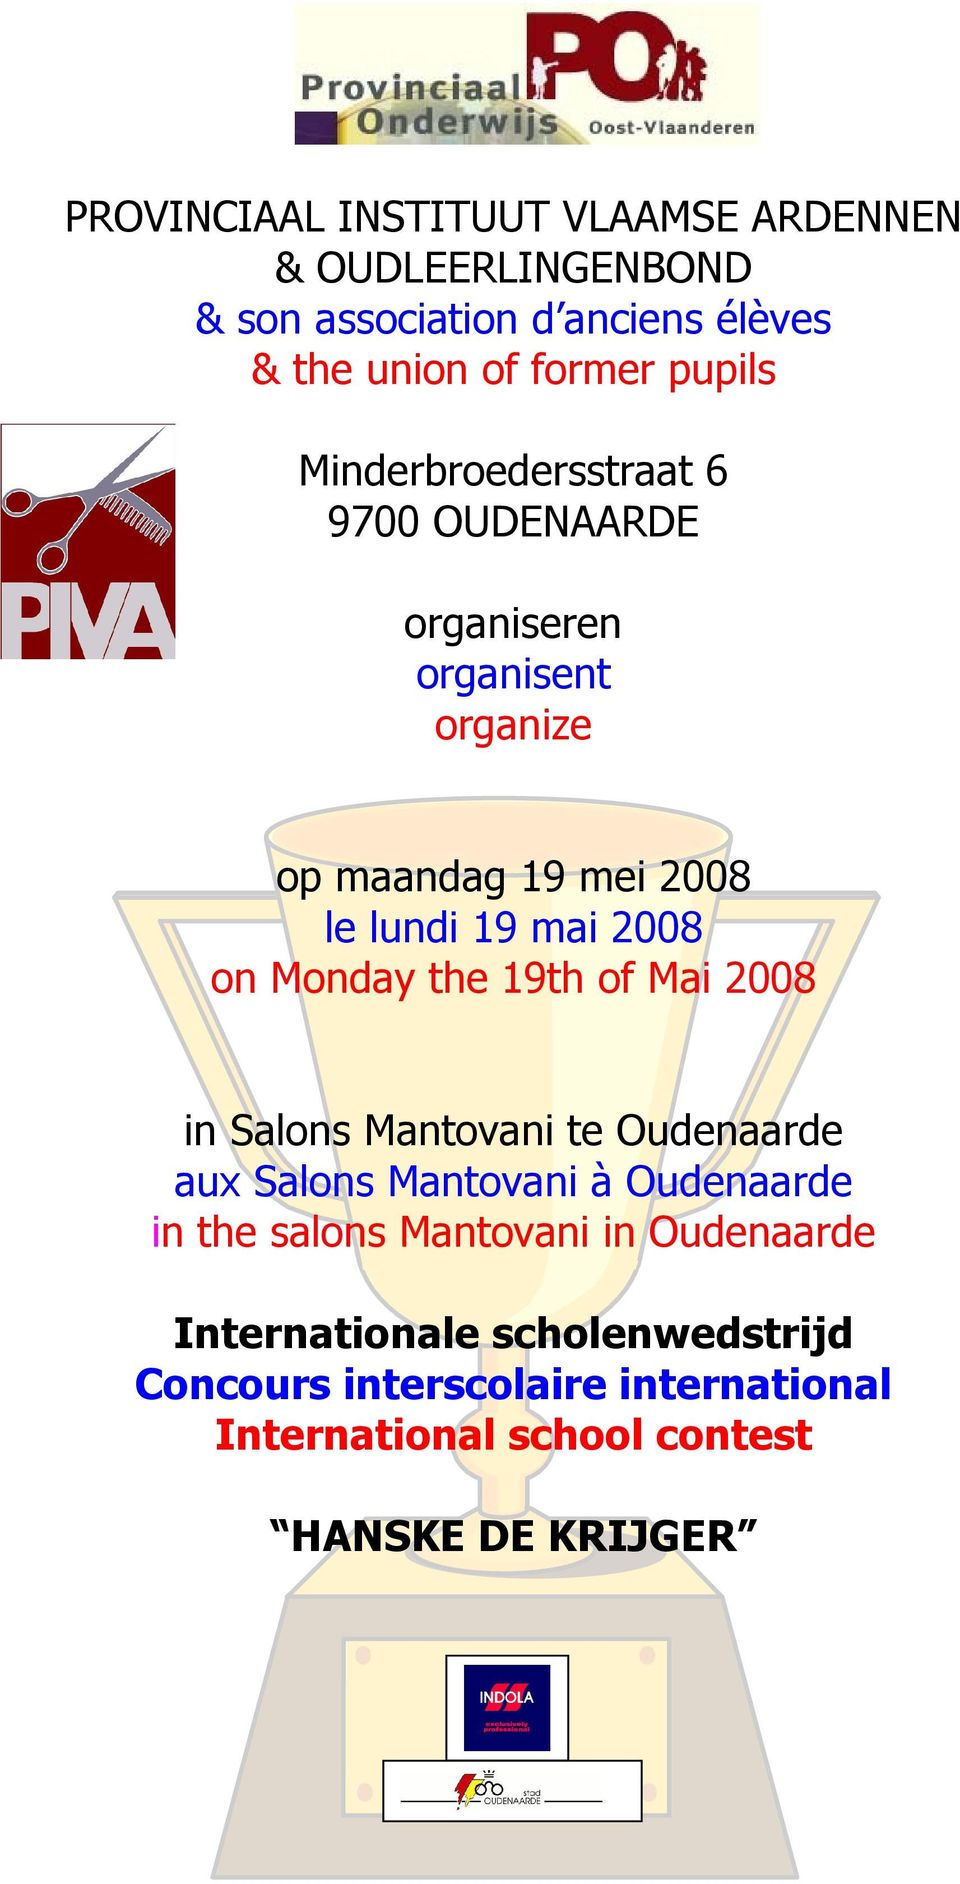 Monday the 19th of Mai 2008 in Salons Mantovani te Oudenaarde aux Salons Mantovani à Oudenaarde in the salons Mantovani in